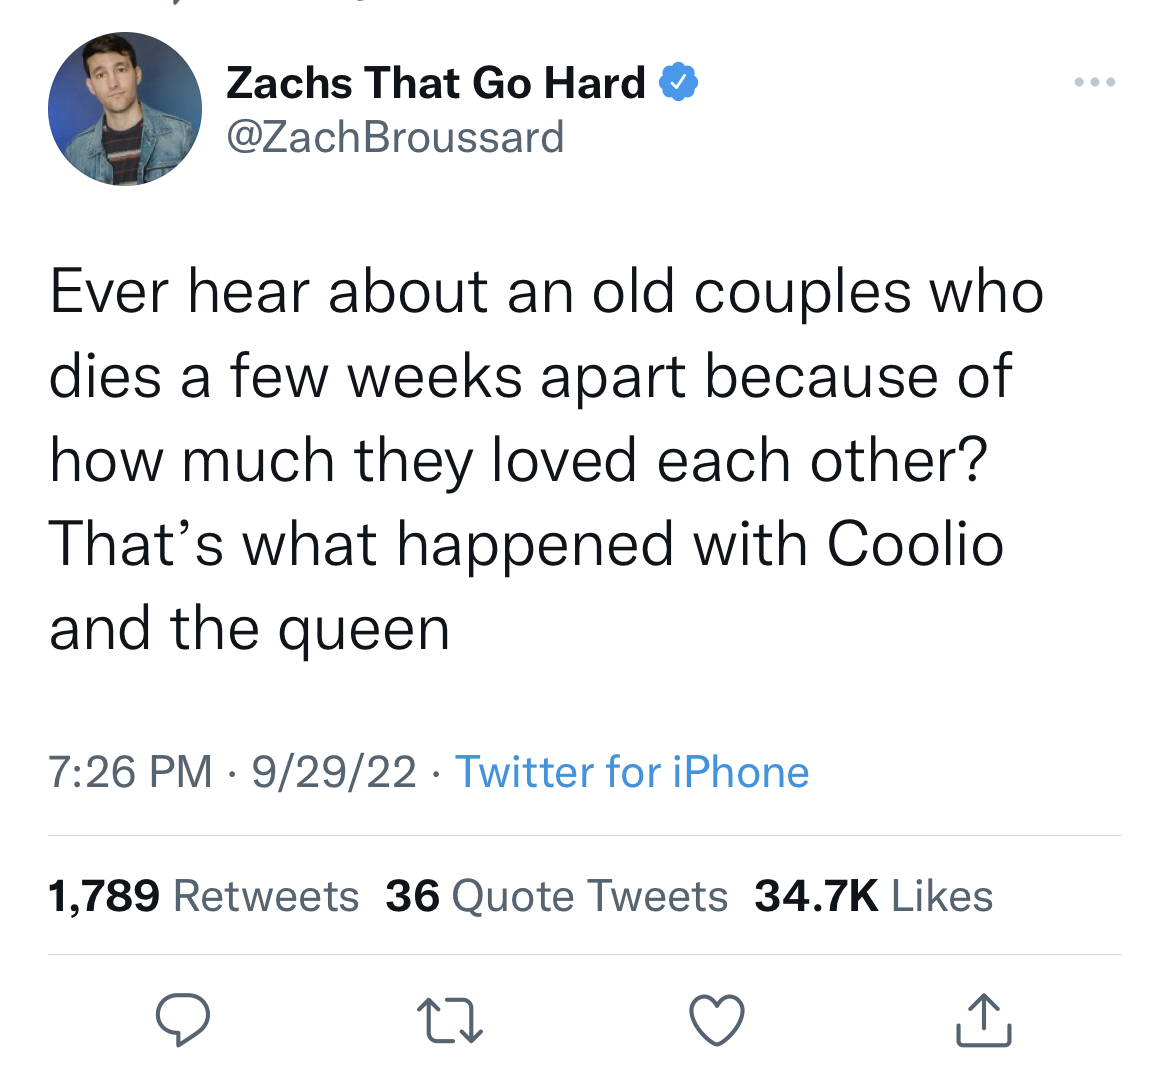 Fresh and funny tweets - y all do a lot of talking then its - Zachs That Go Hard Ever hear about an old couples who dies a few weeks apart because of how much they loved each other? That's what happened with Coolio and the queen 92922 Twitter for iPhone 1